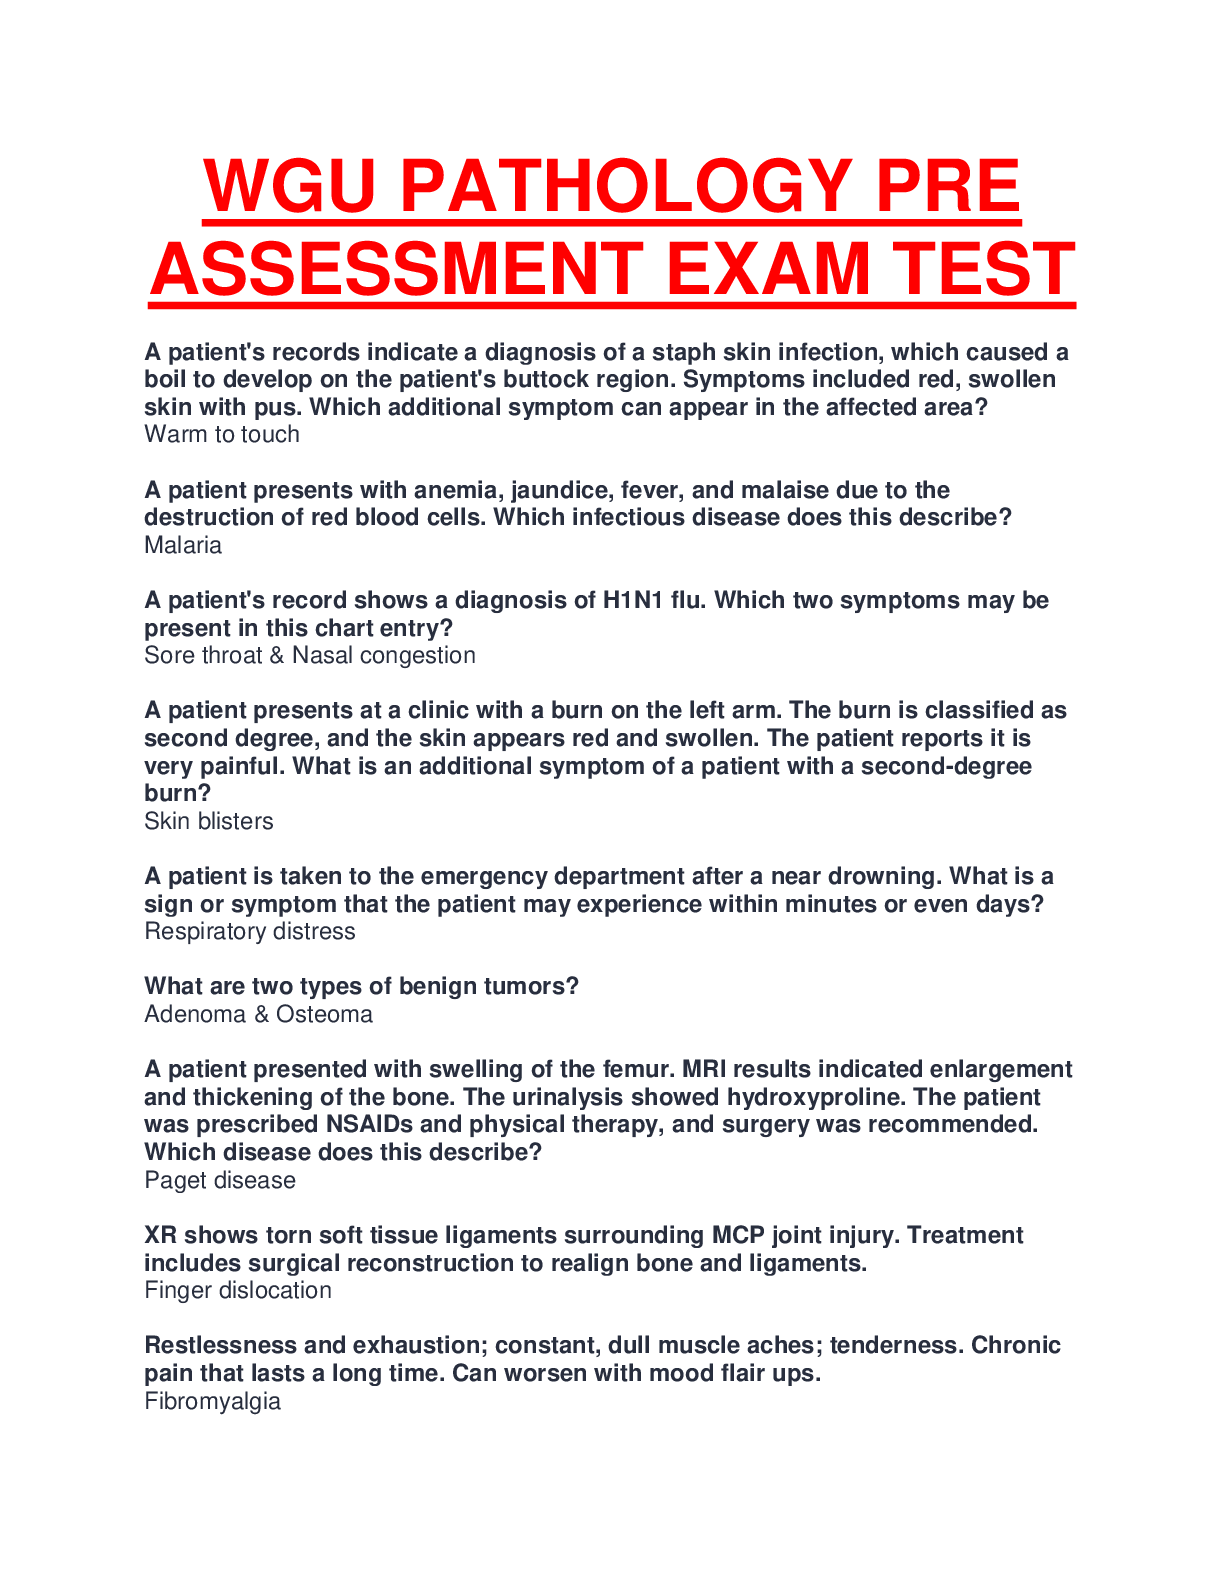 WGU PATHOLOGY PRE ASSESSMENT ACTUAL EXAM TEST WITH COMPLETE QUESTIONS